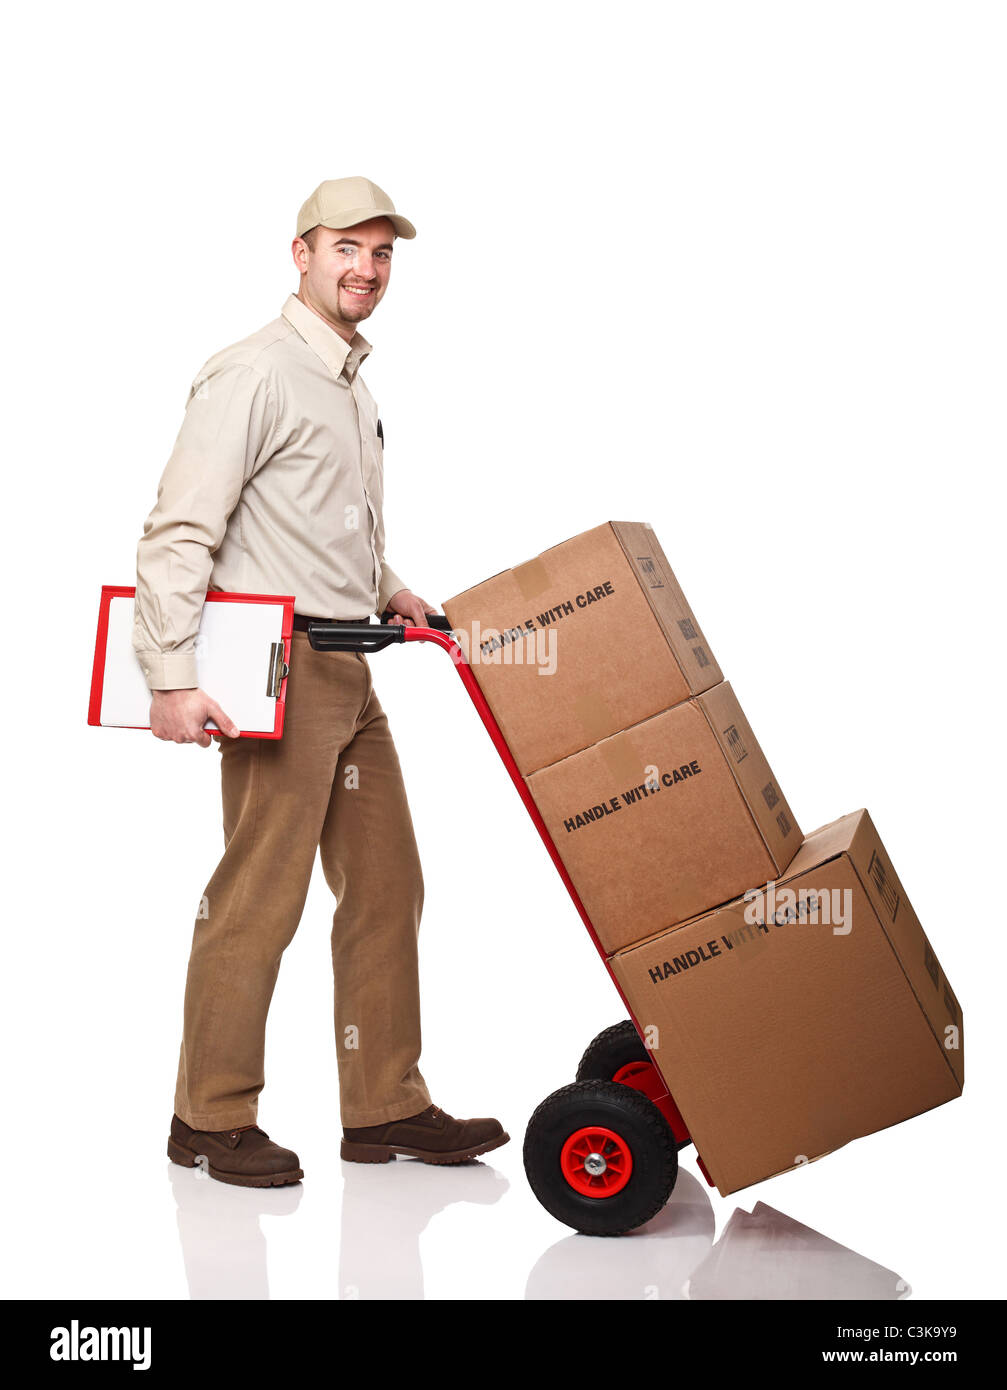 smiling delivery man with red handtruck on white background Stock Photo